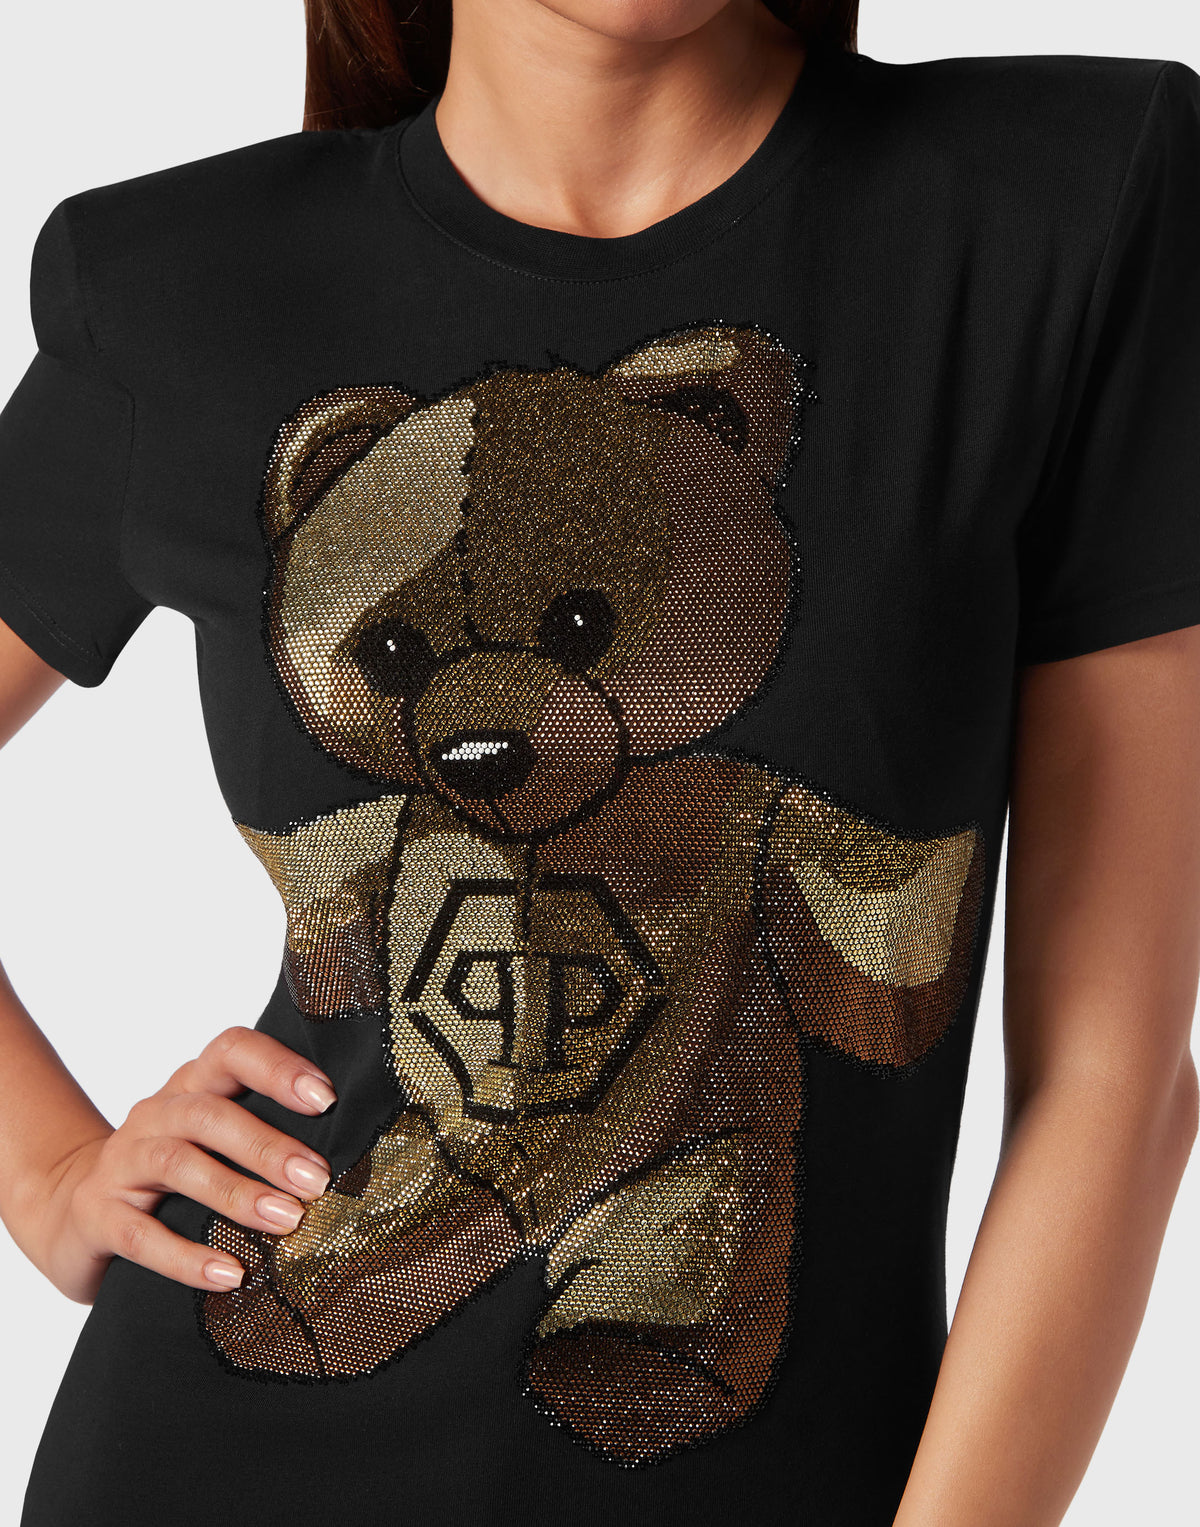 Padded Shoulder Sleeveless T-Shirt Sexy Pure Fit with Crystals Teddy Bear black